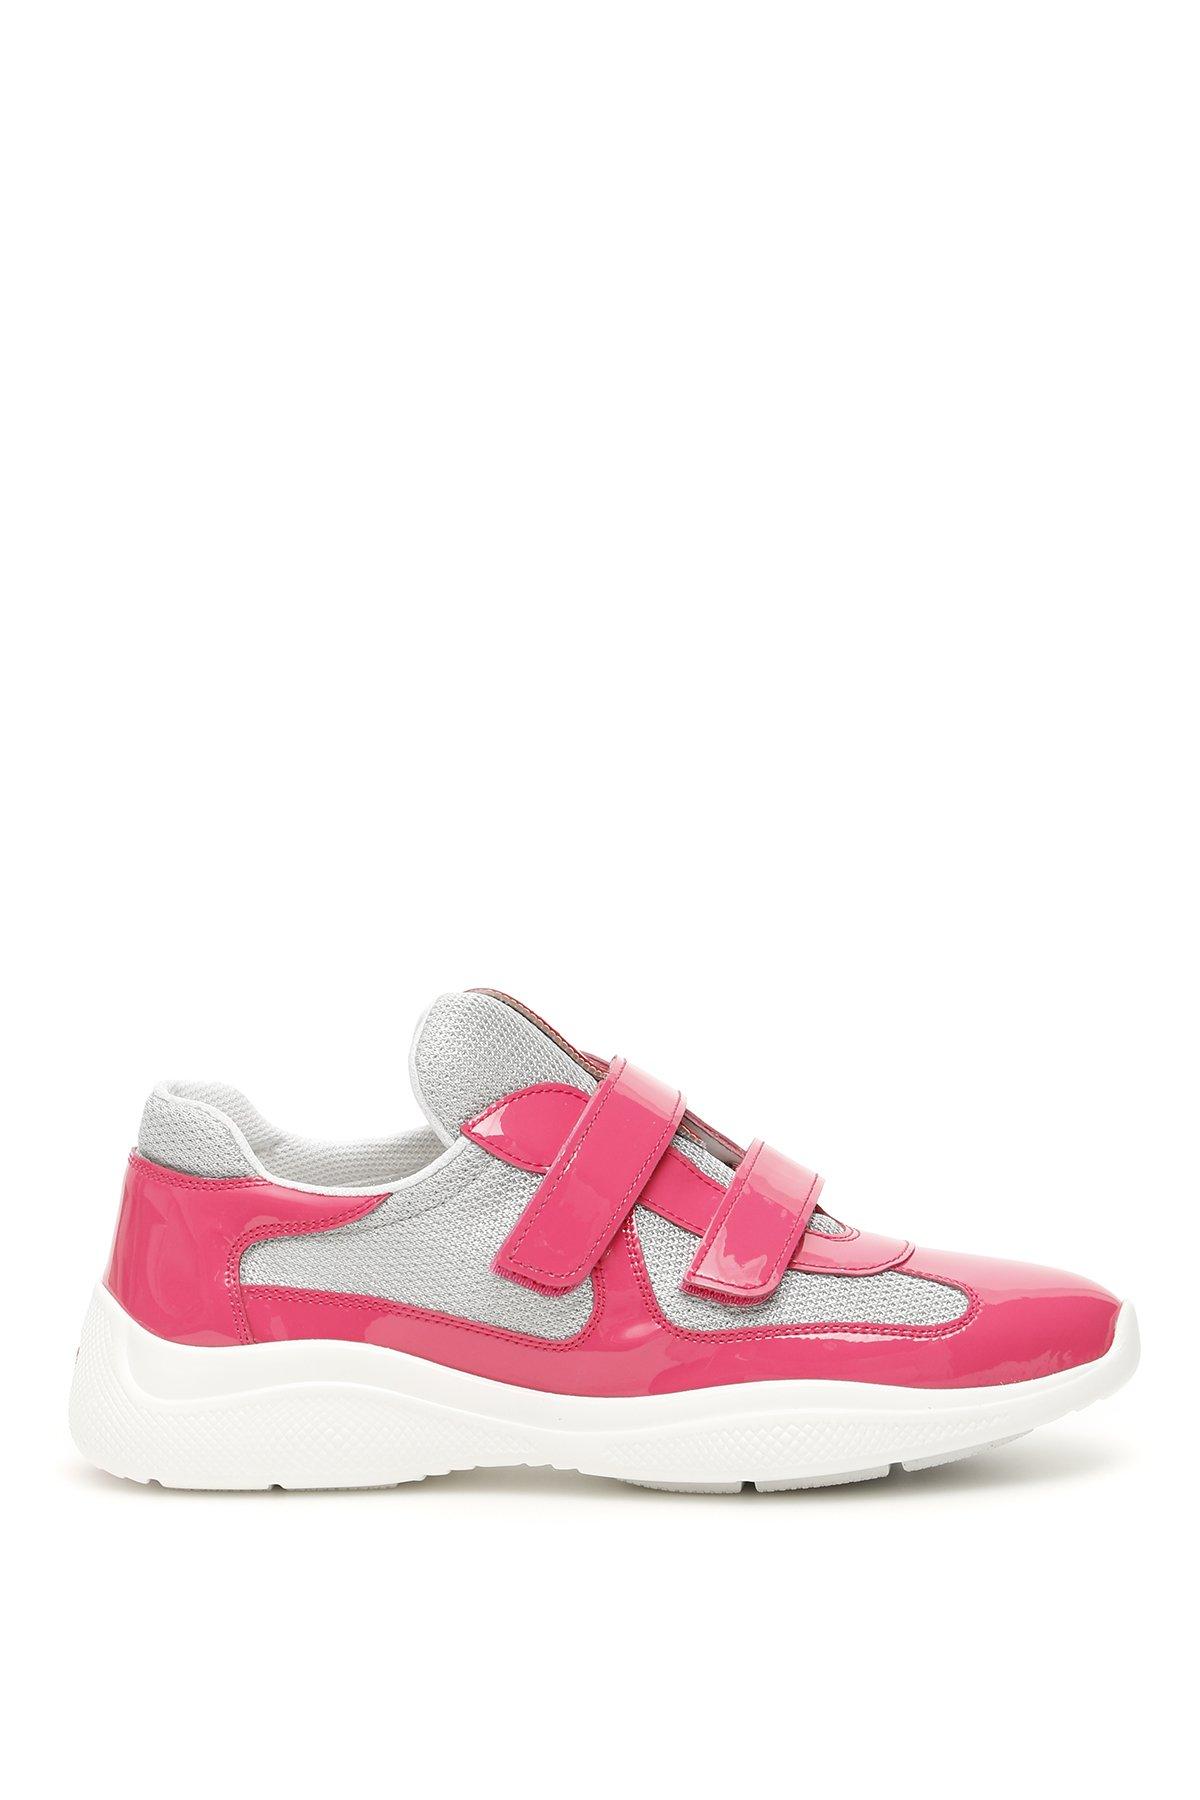 Prada Velcro Strap Contrasting Panelled Sneakers in Pink | Lyst